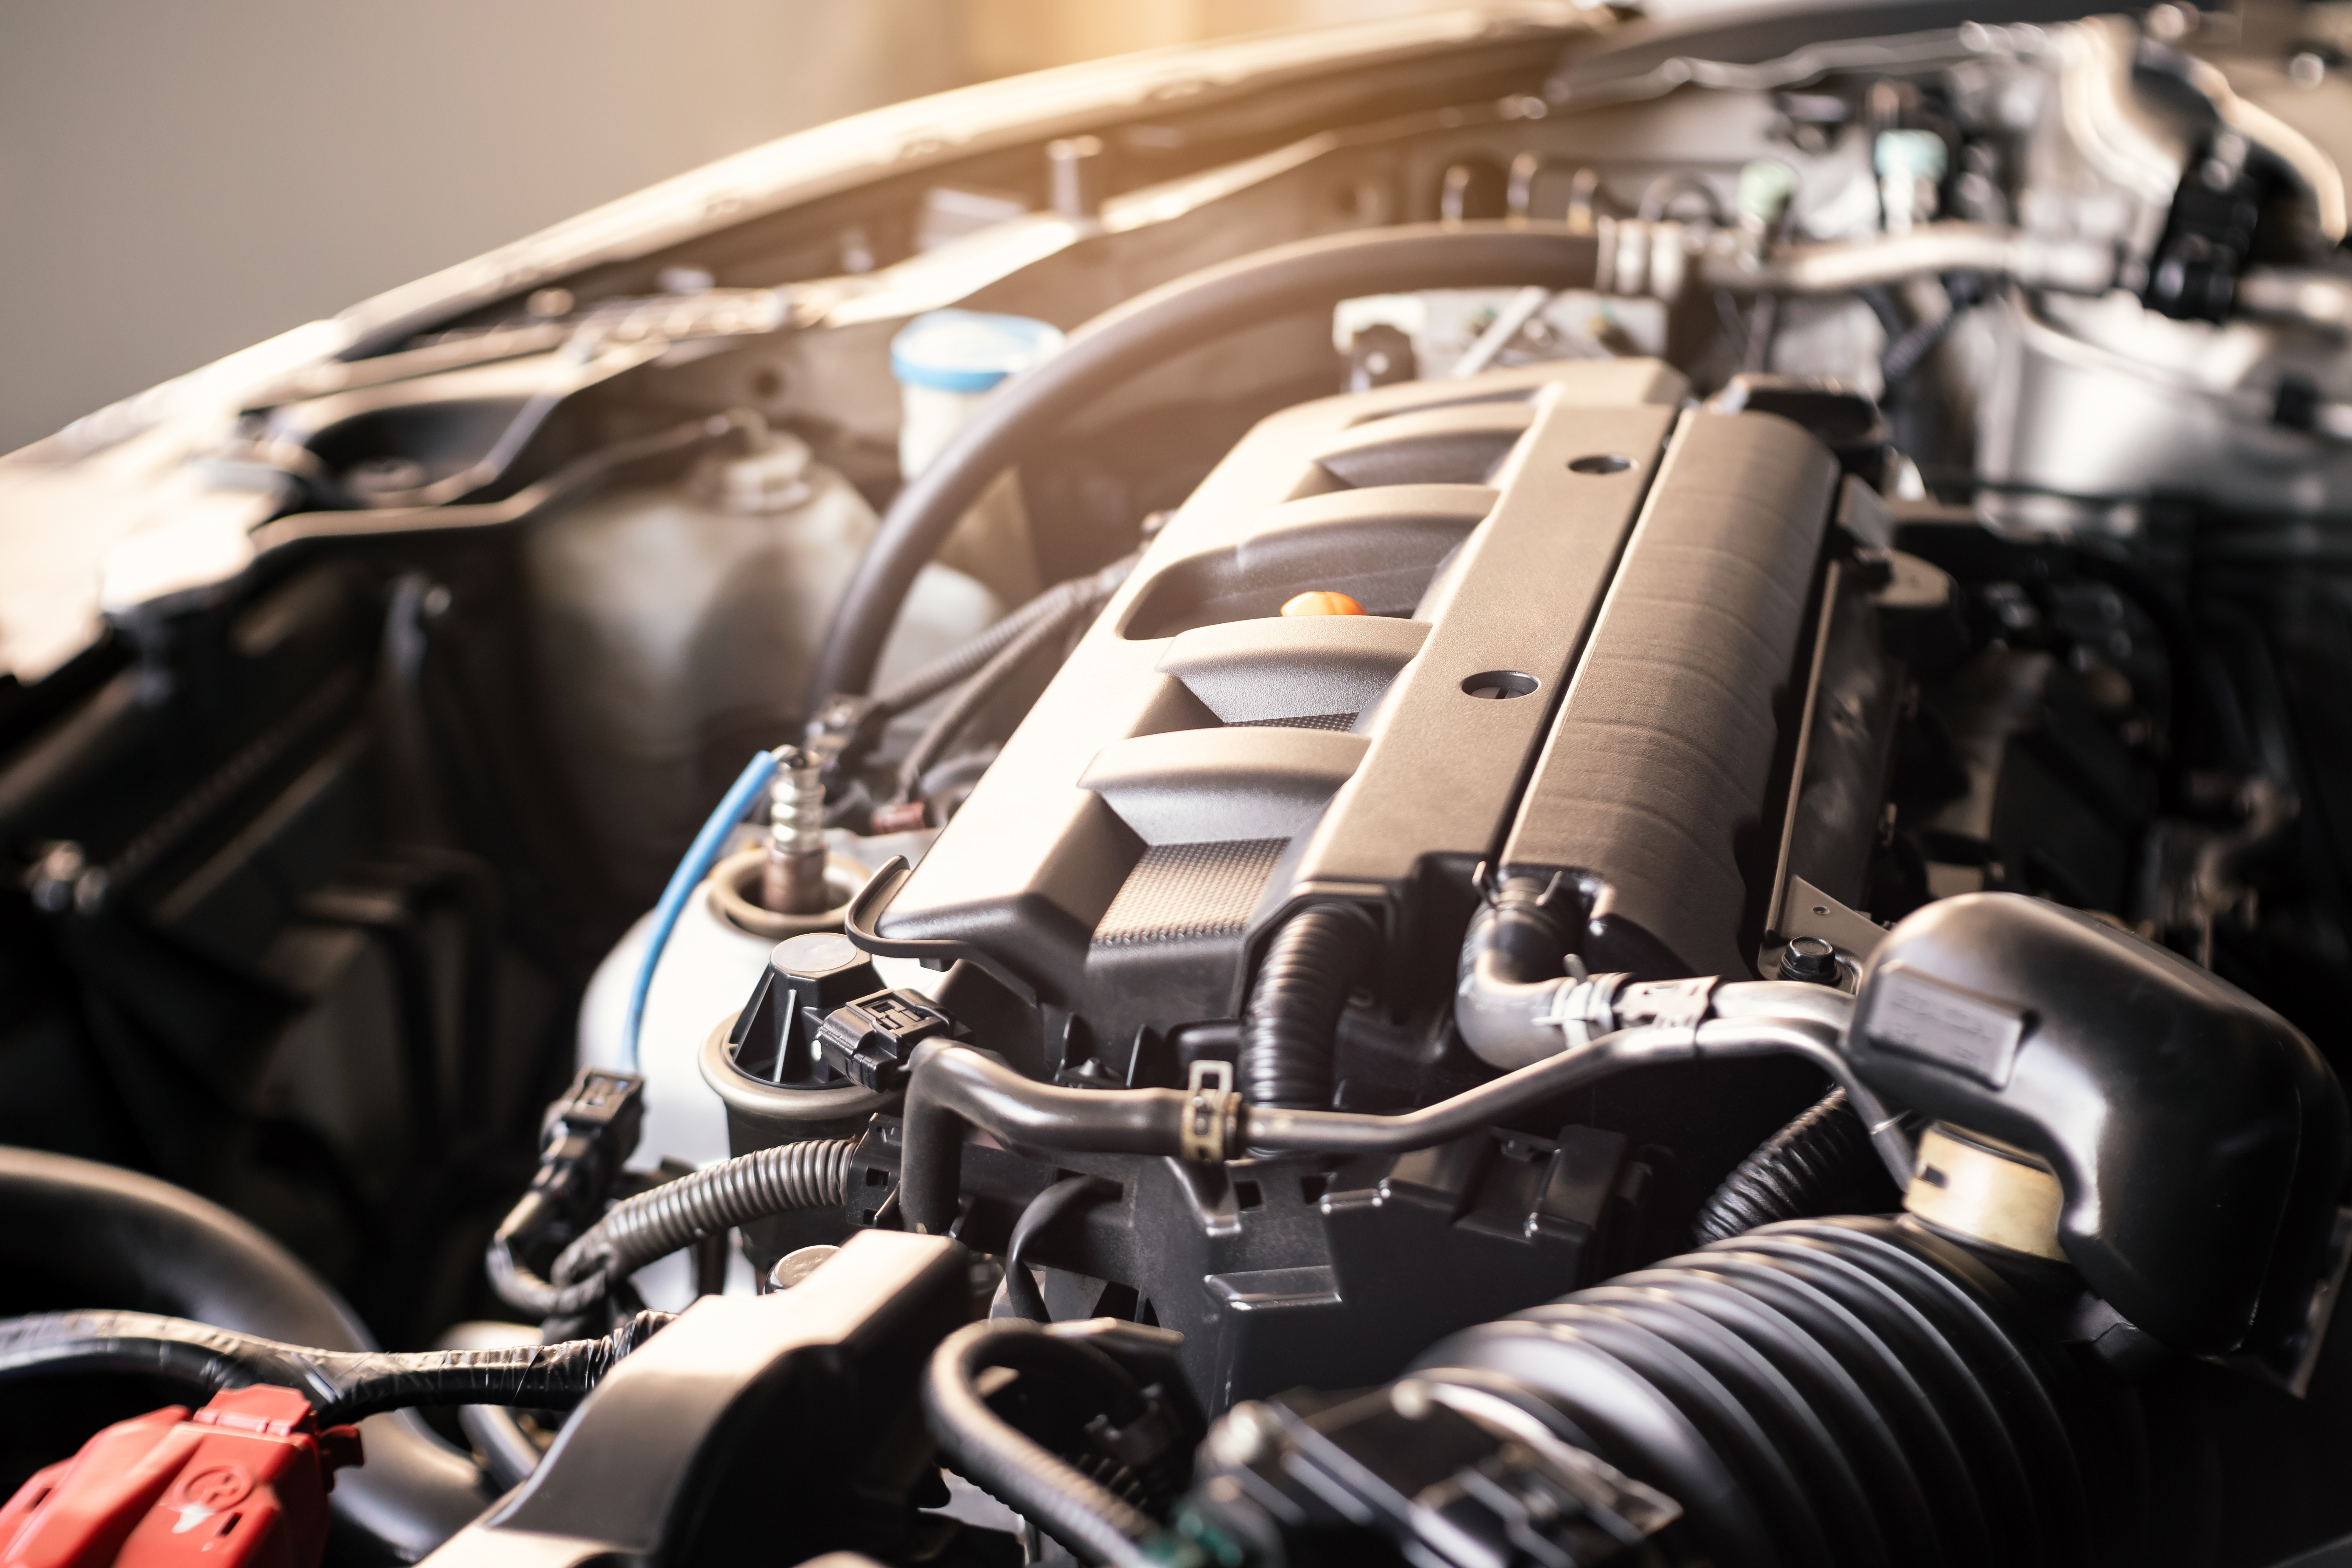 A diesel combustion engine - learn why getting intake manifold cleaning in Spokane-Coeur d'Alene, WA/ID is so important.